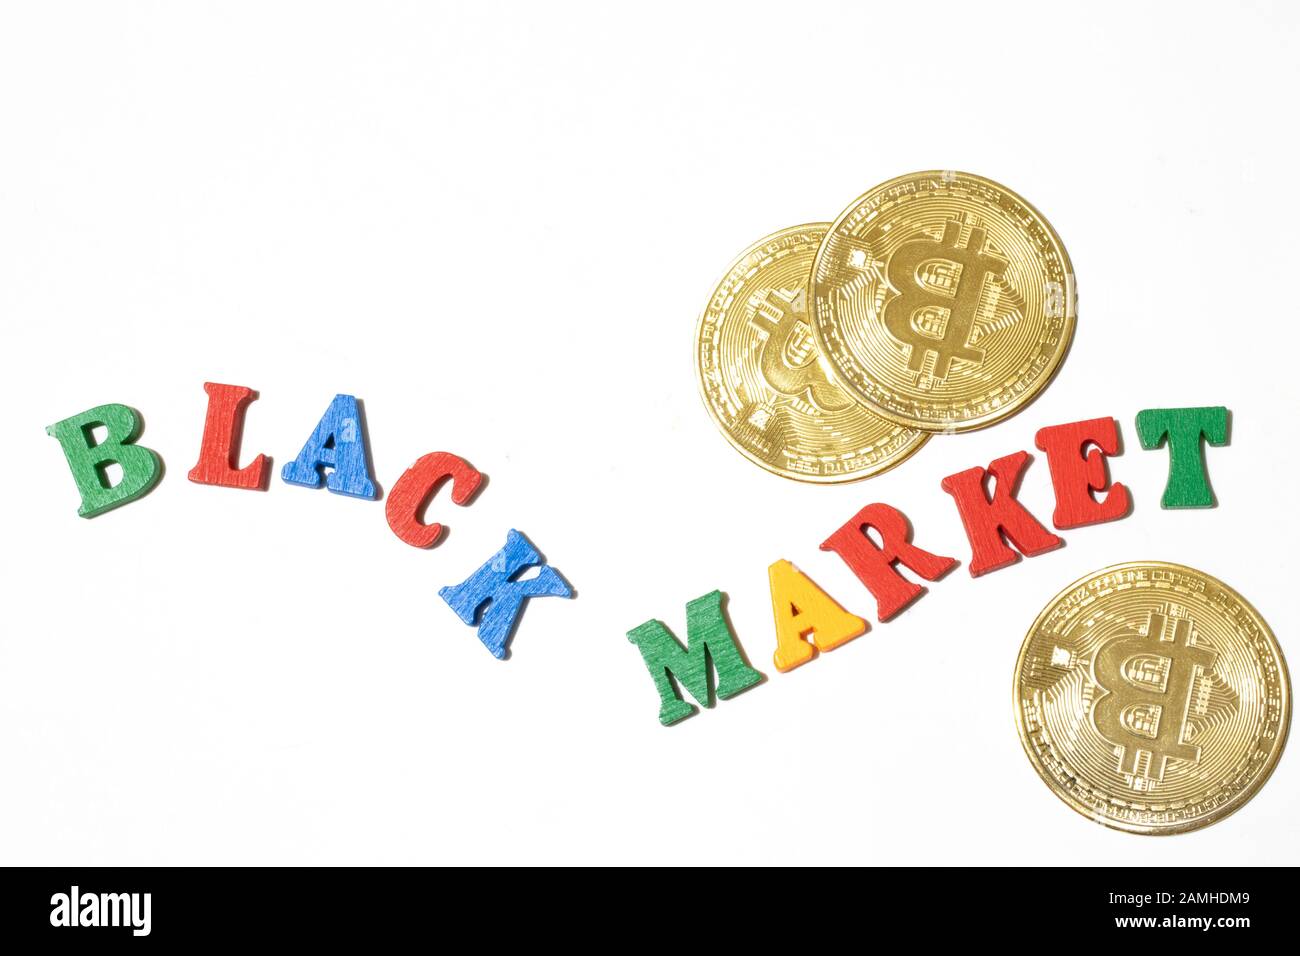 Words black market made with letterboard and bitcoin coins on white background flat lay Stock Photo